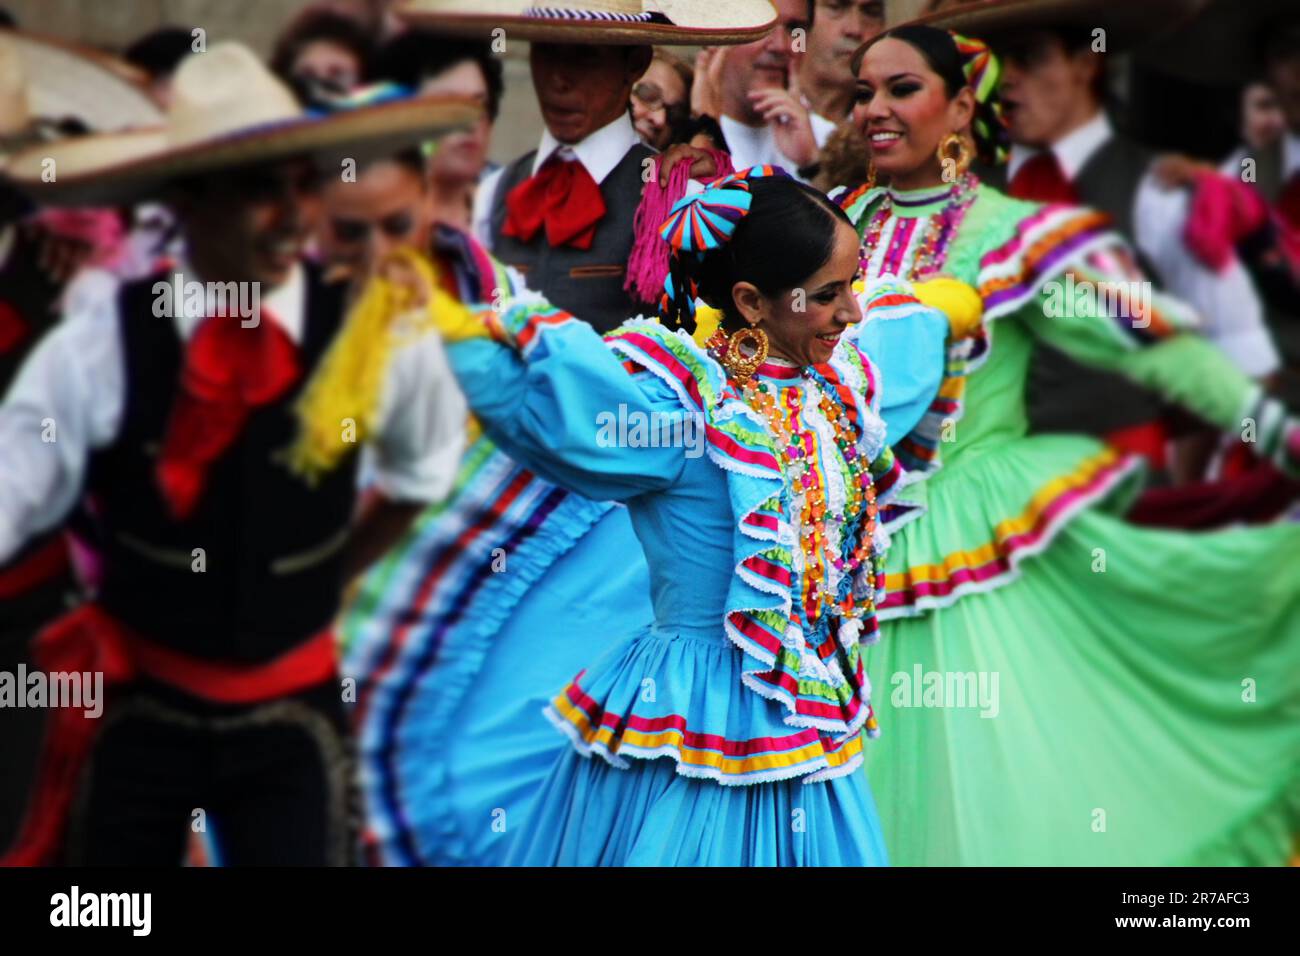 A group of men and women wearing traditional Mexican clothing, including colorful dresses and wide-brimmed hats, are dancing in a lively parade on a c Stock Photo